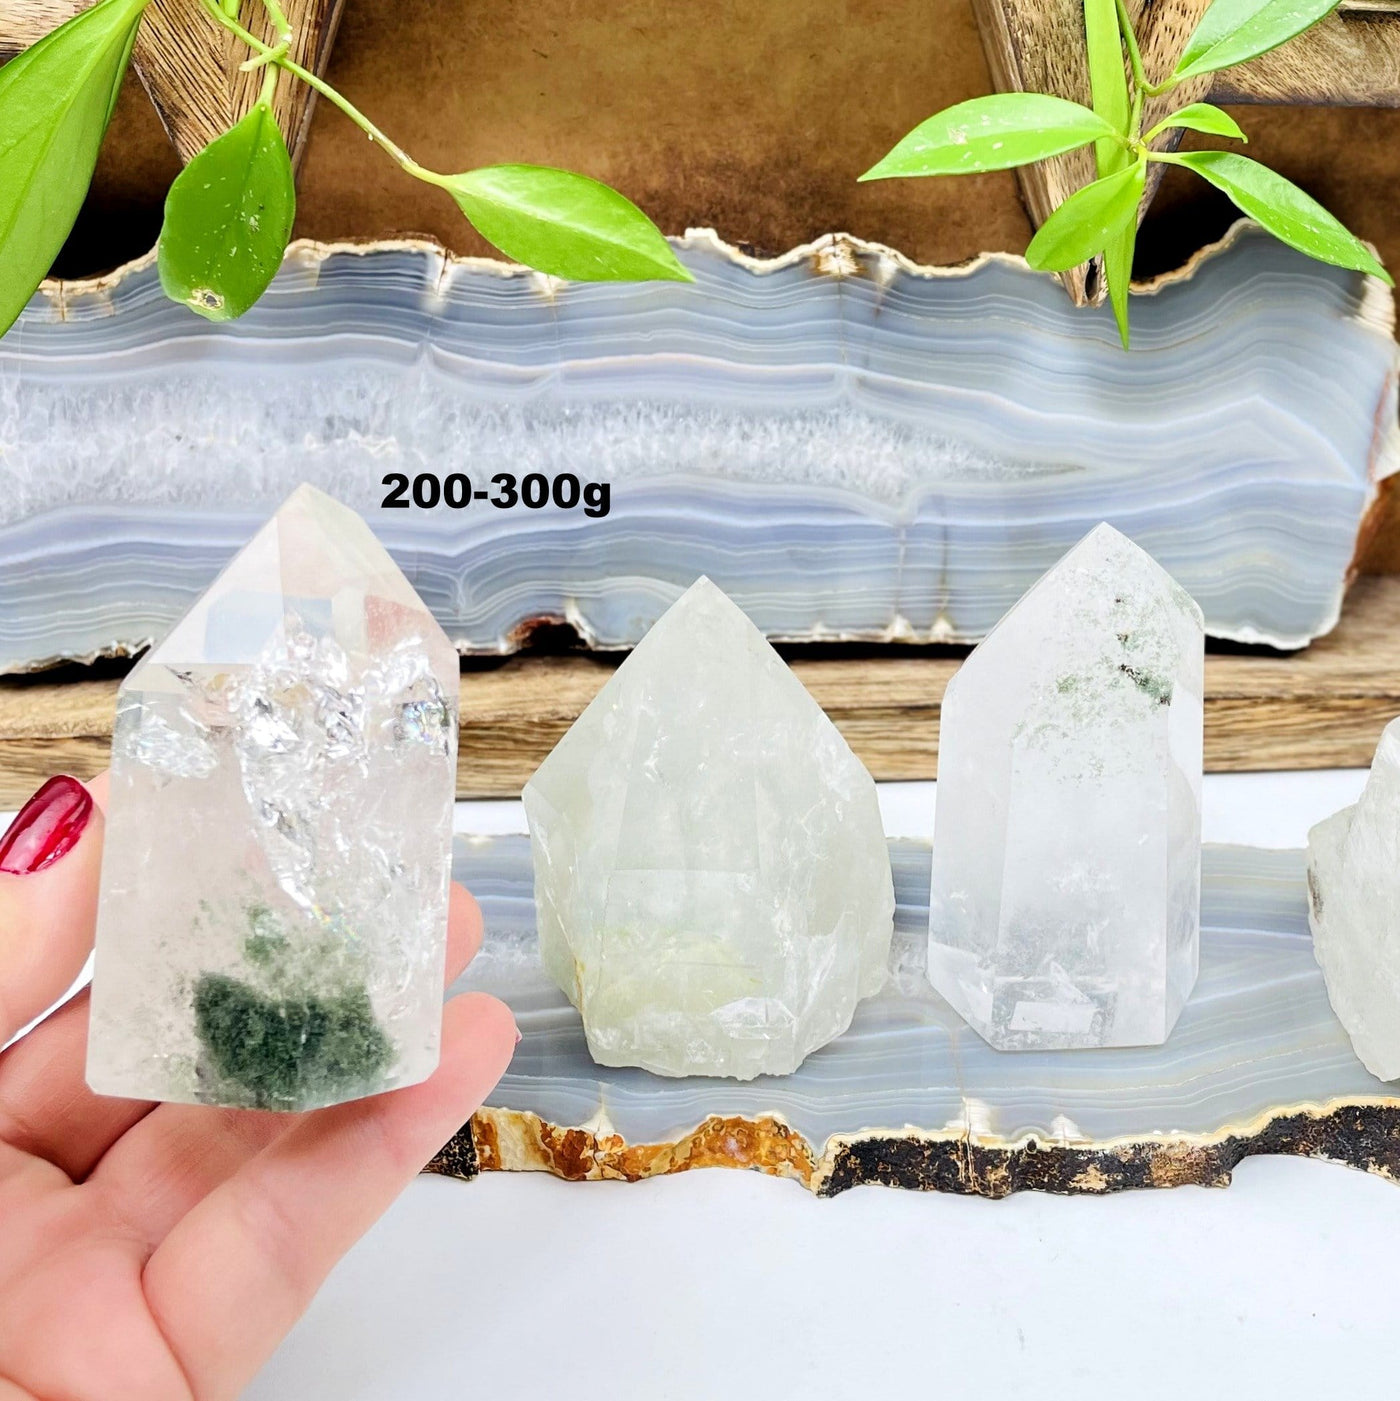 200-300g semi-polished quartz with chlorite point in hand for size reference with others on display